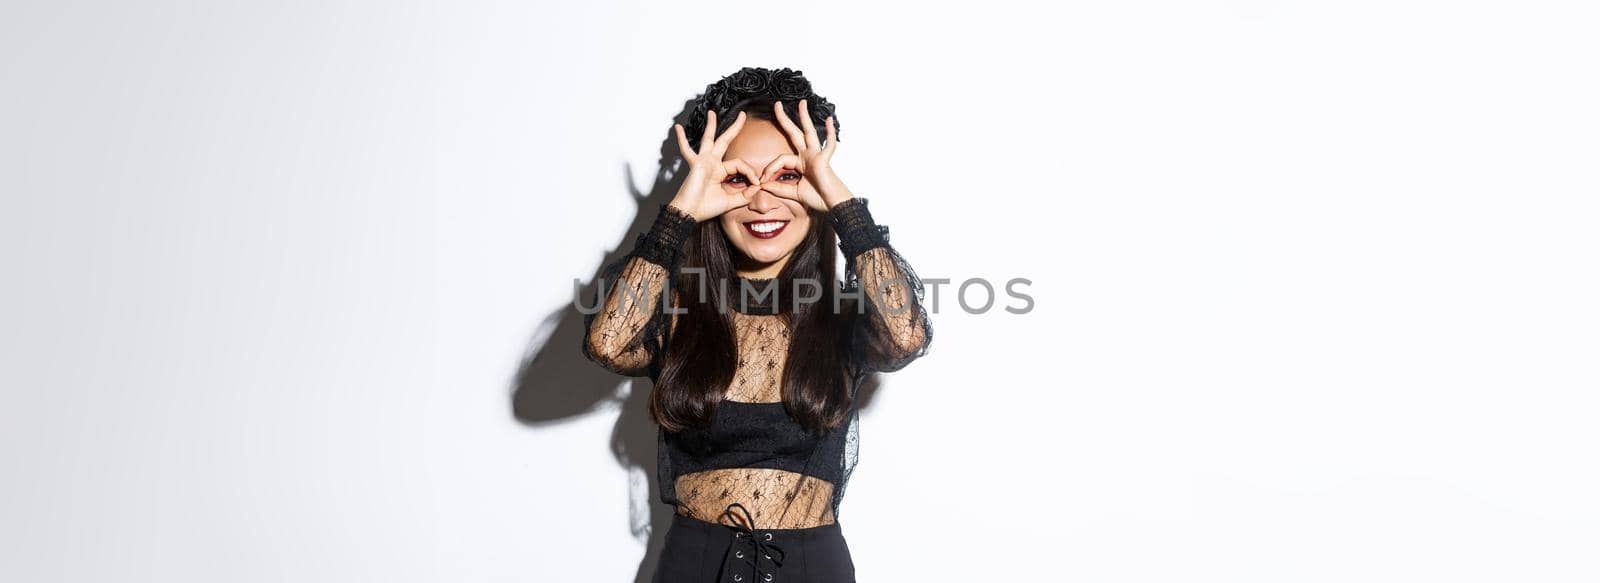 Beautiful asian woman in witch costume looking through finger glasses and smiling happy, standing over white background.